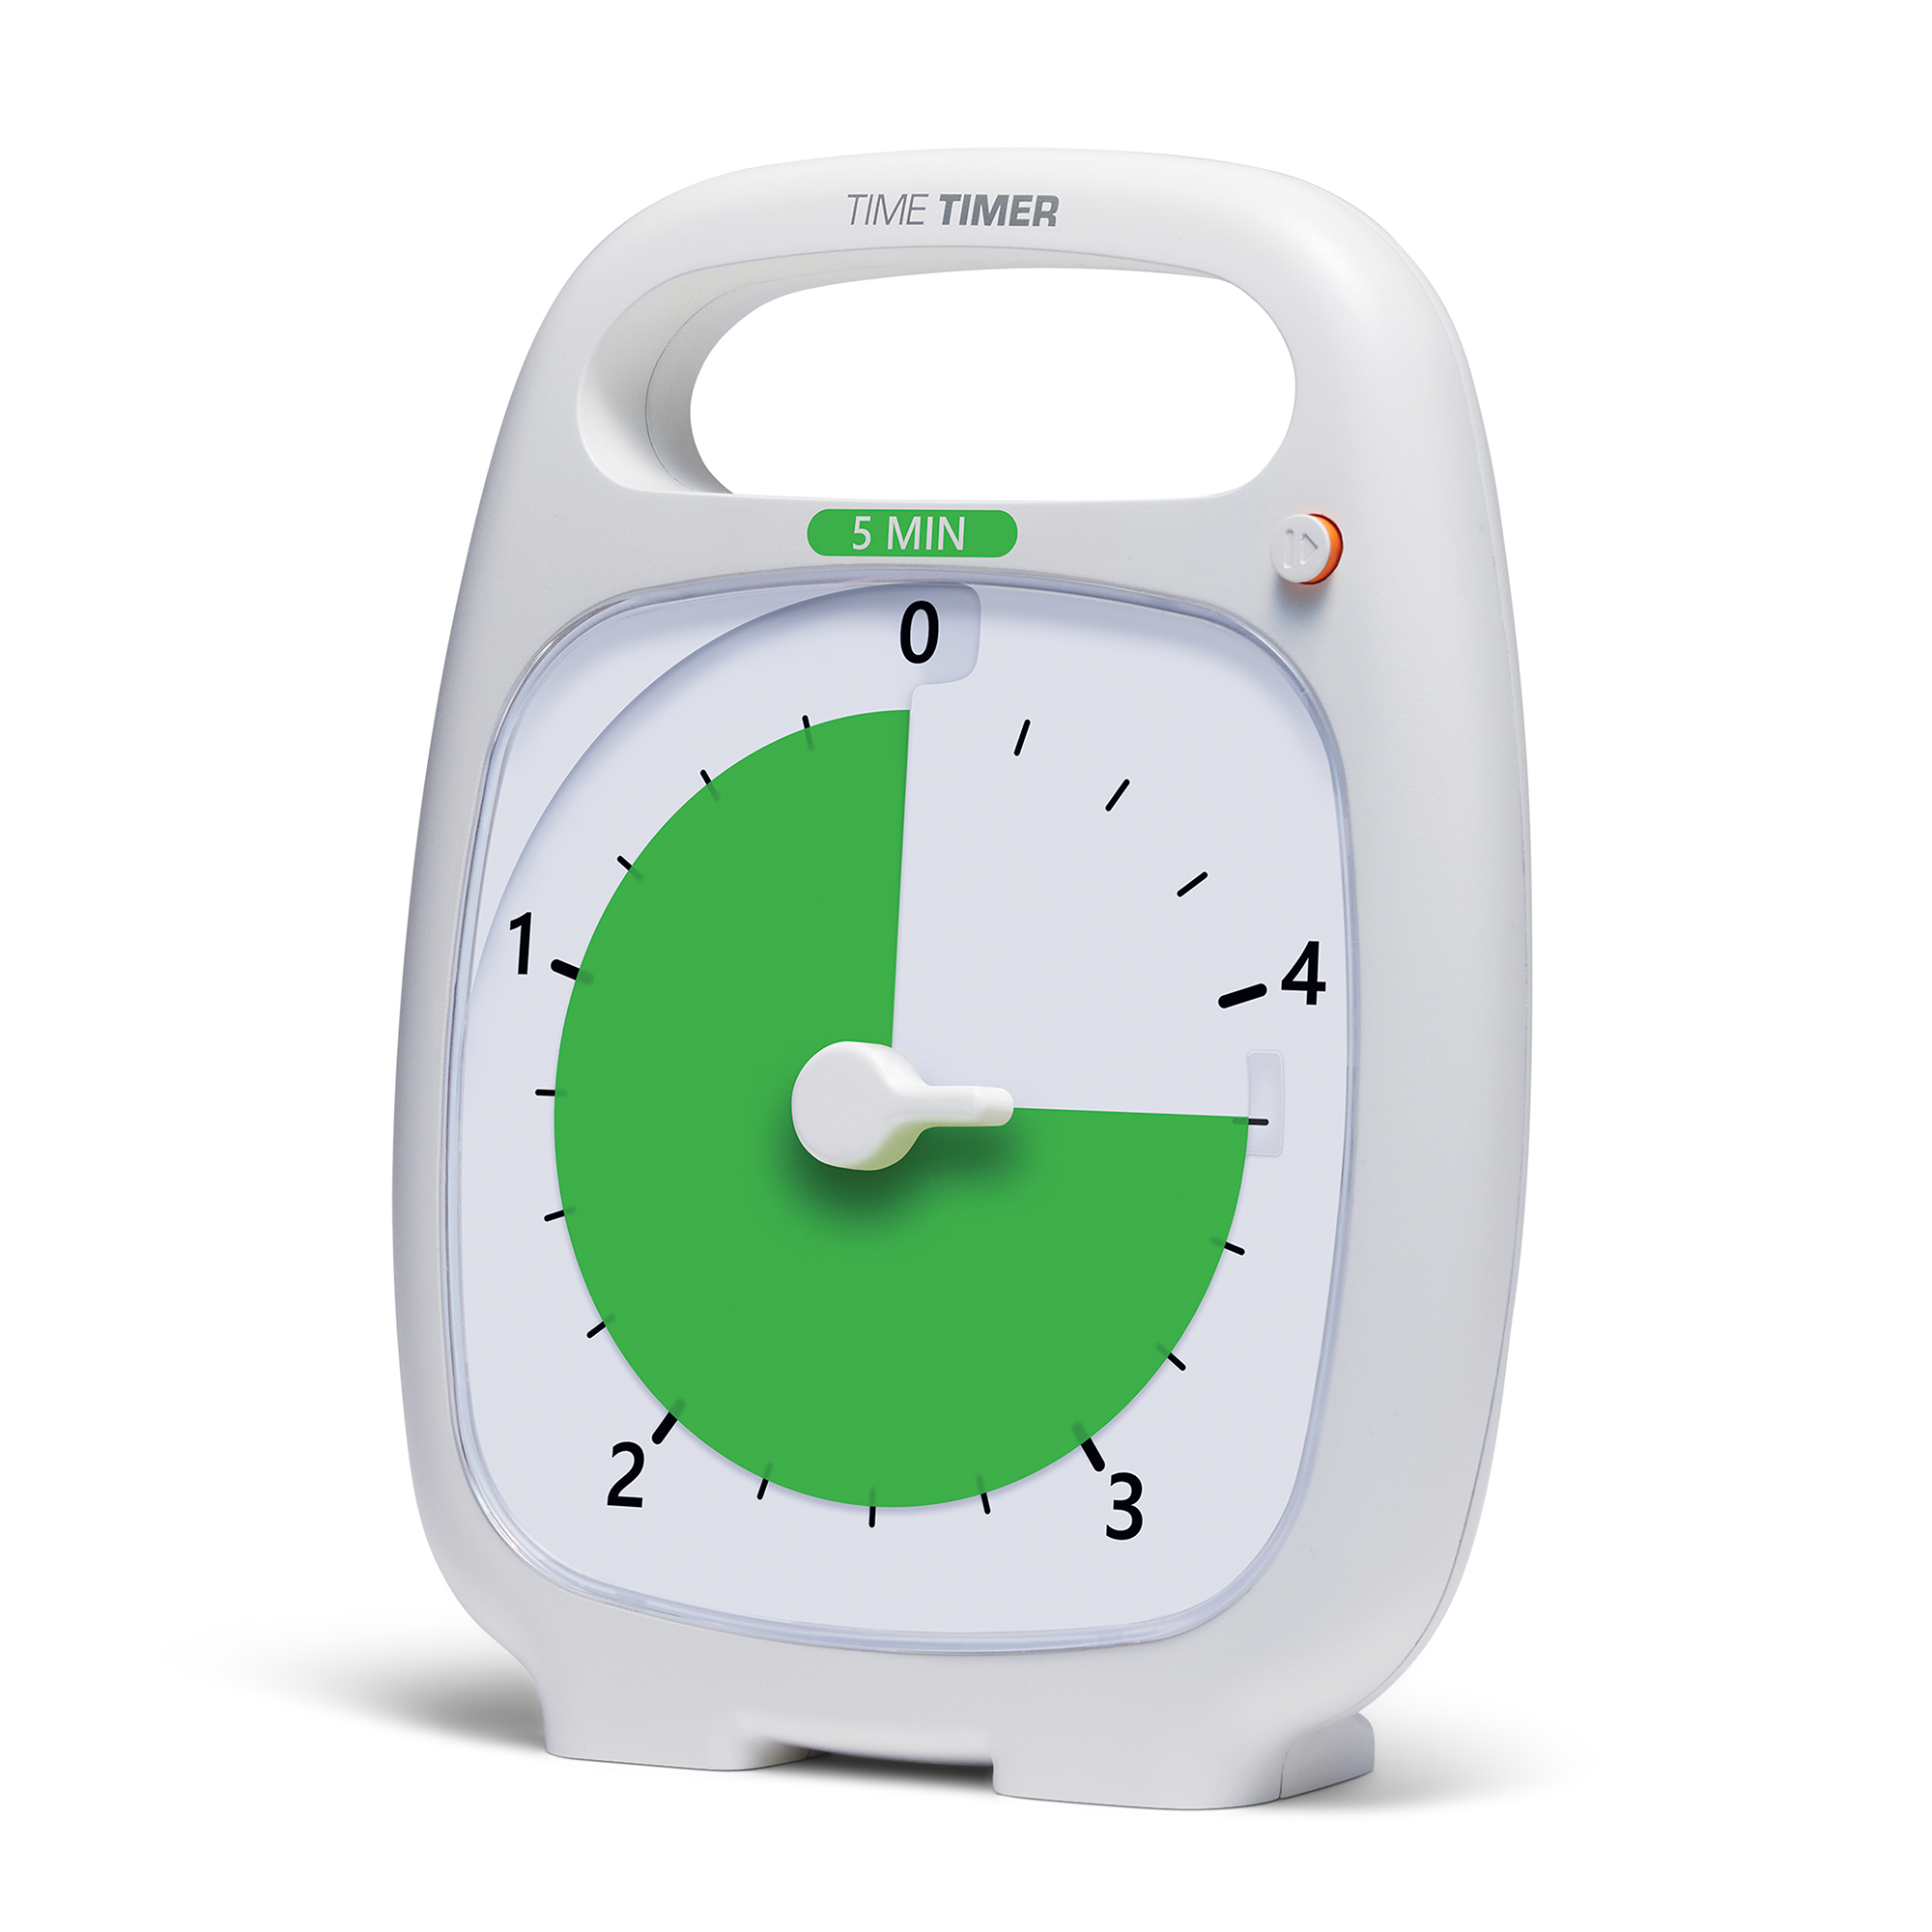 Conquer 5 Minutes With Ease: The Time Timer® PLUS 5 Minute Timer